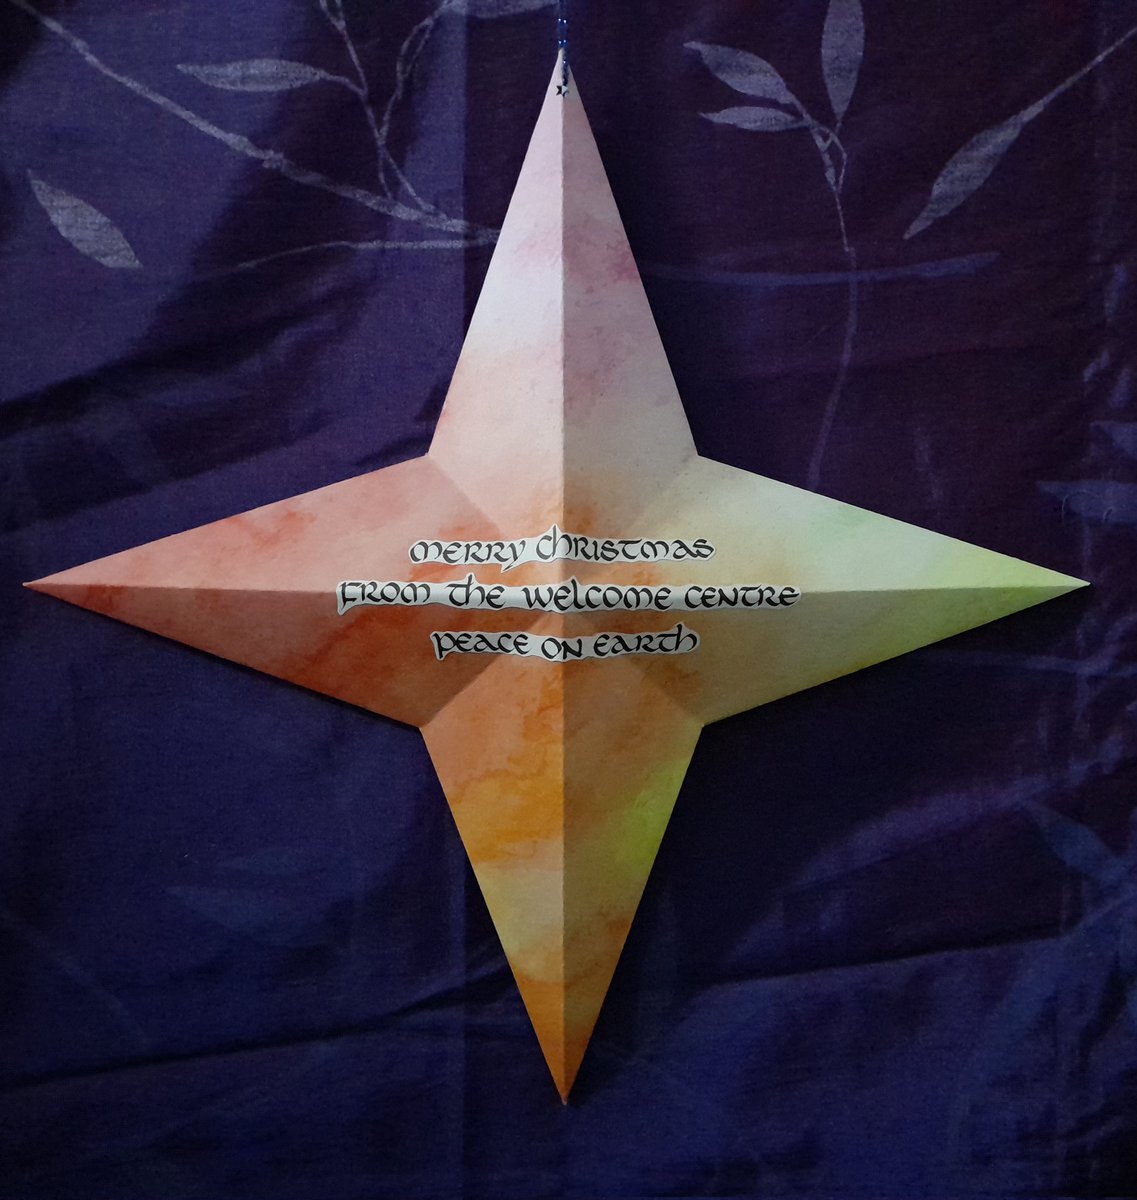 Stars of wonder! Stars of light! A glorious multitude of calligraphic #Christmas origami stars created y/day at my workshop for @waiyincws at @waiyin_wc Big Beautiful Stars! 40cm point to point...Bravo! #art #Calligraphy #community #Wellbeing #Manchester @nmcp2017 @McrCarers